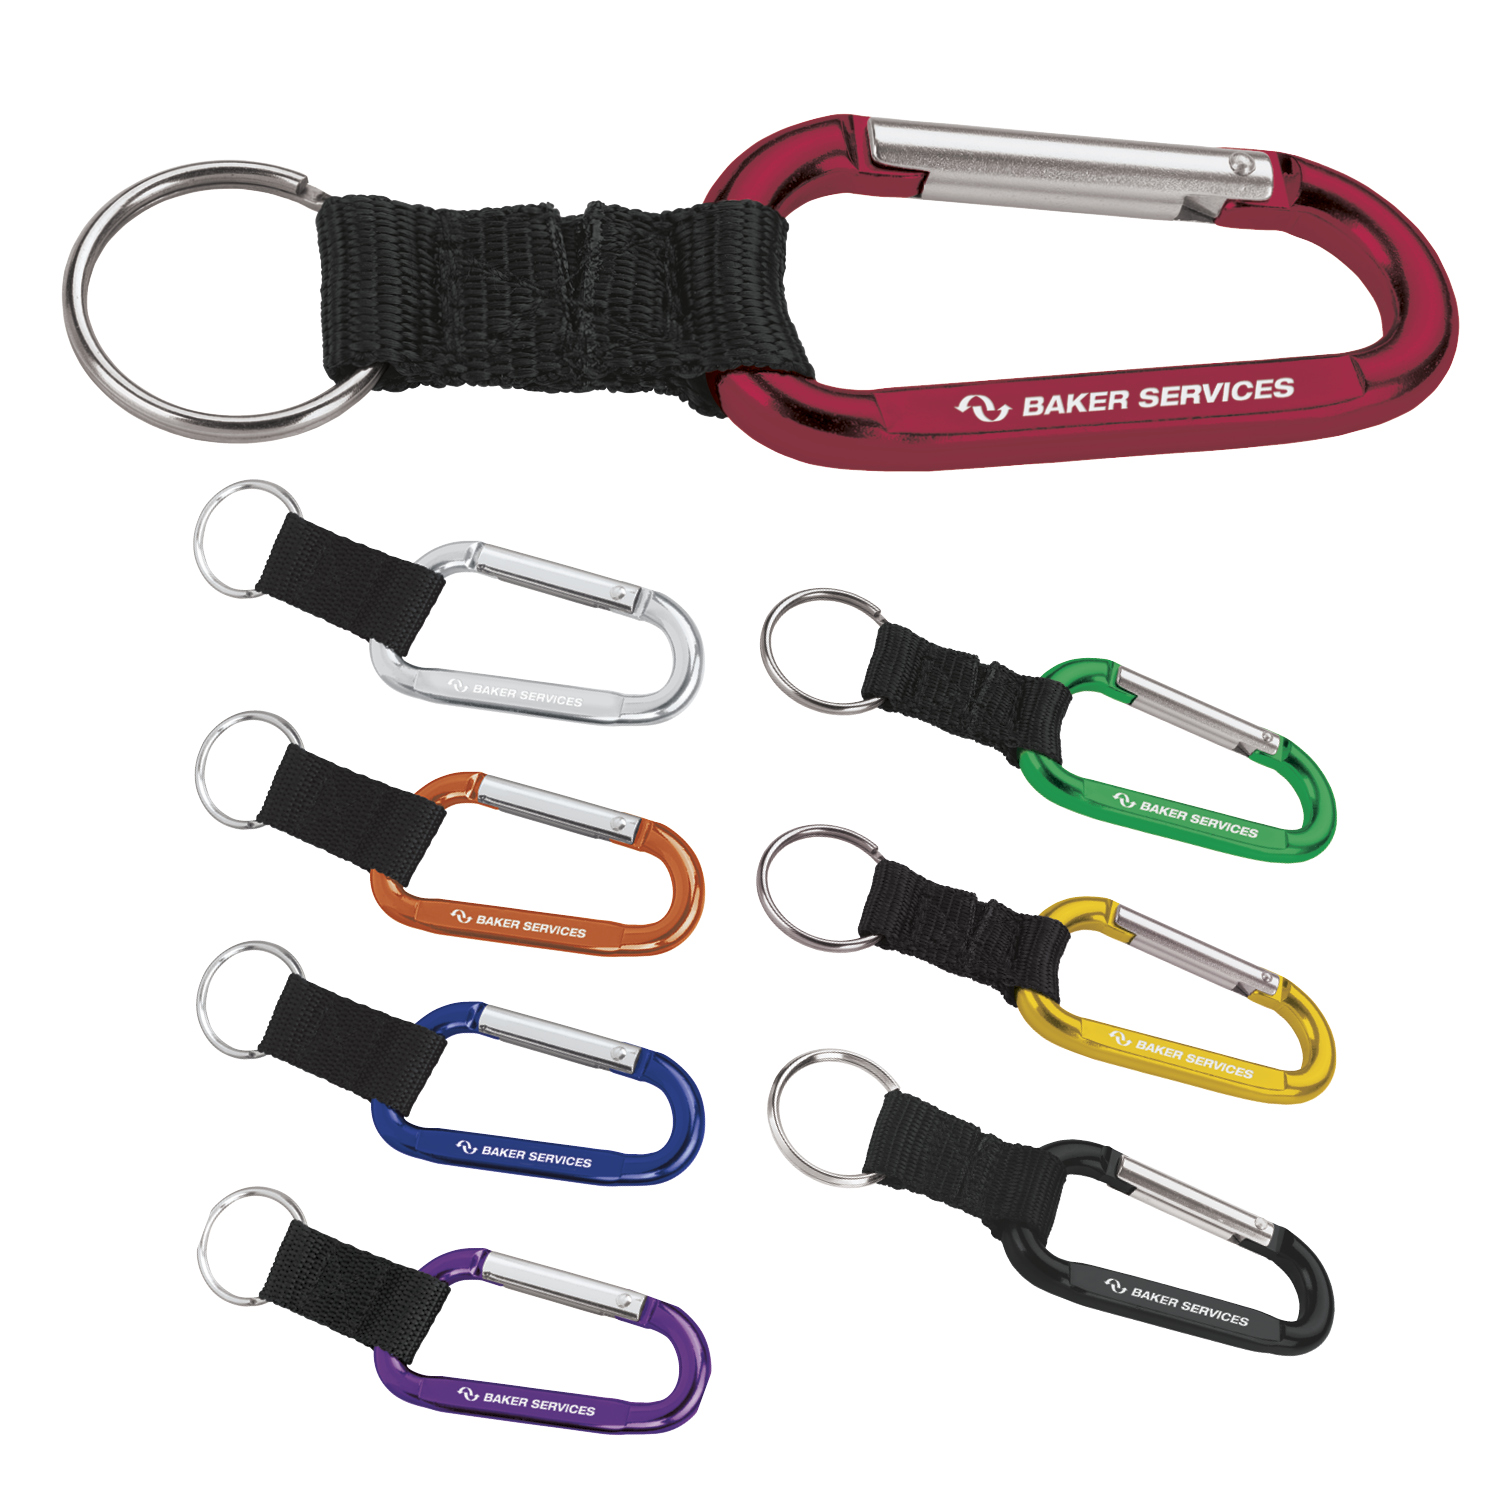 Plastic Carabiner with Compass - AIGP6108 - IdeaStage Promotional Products